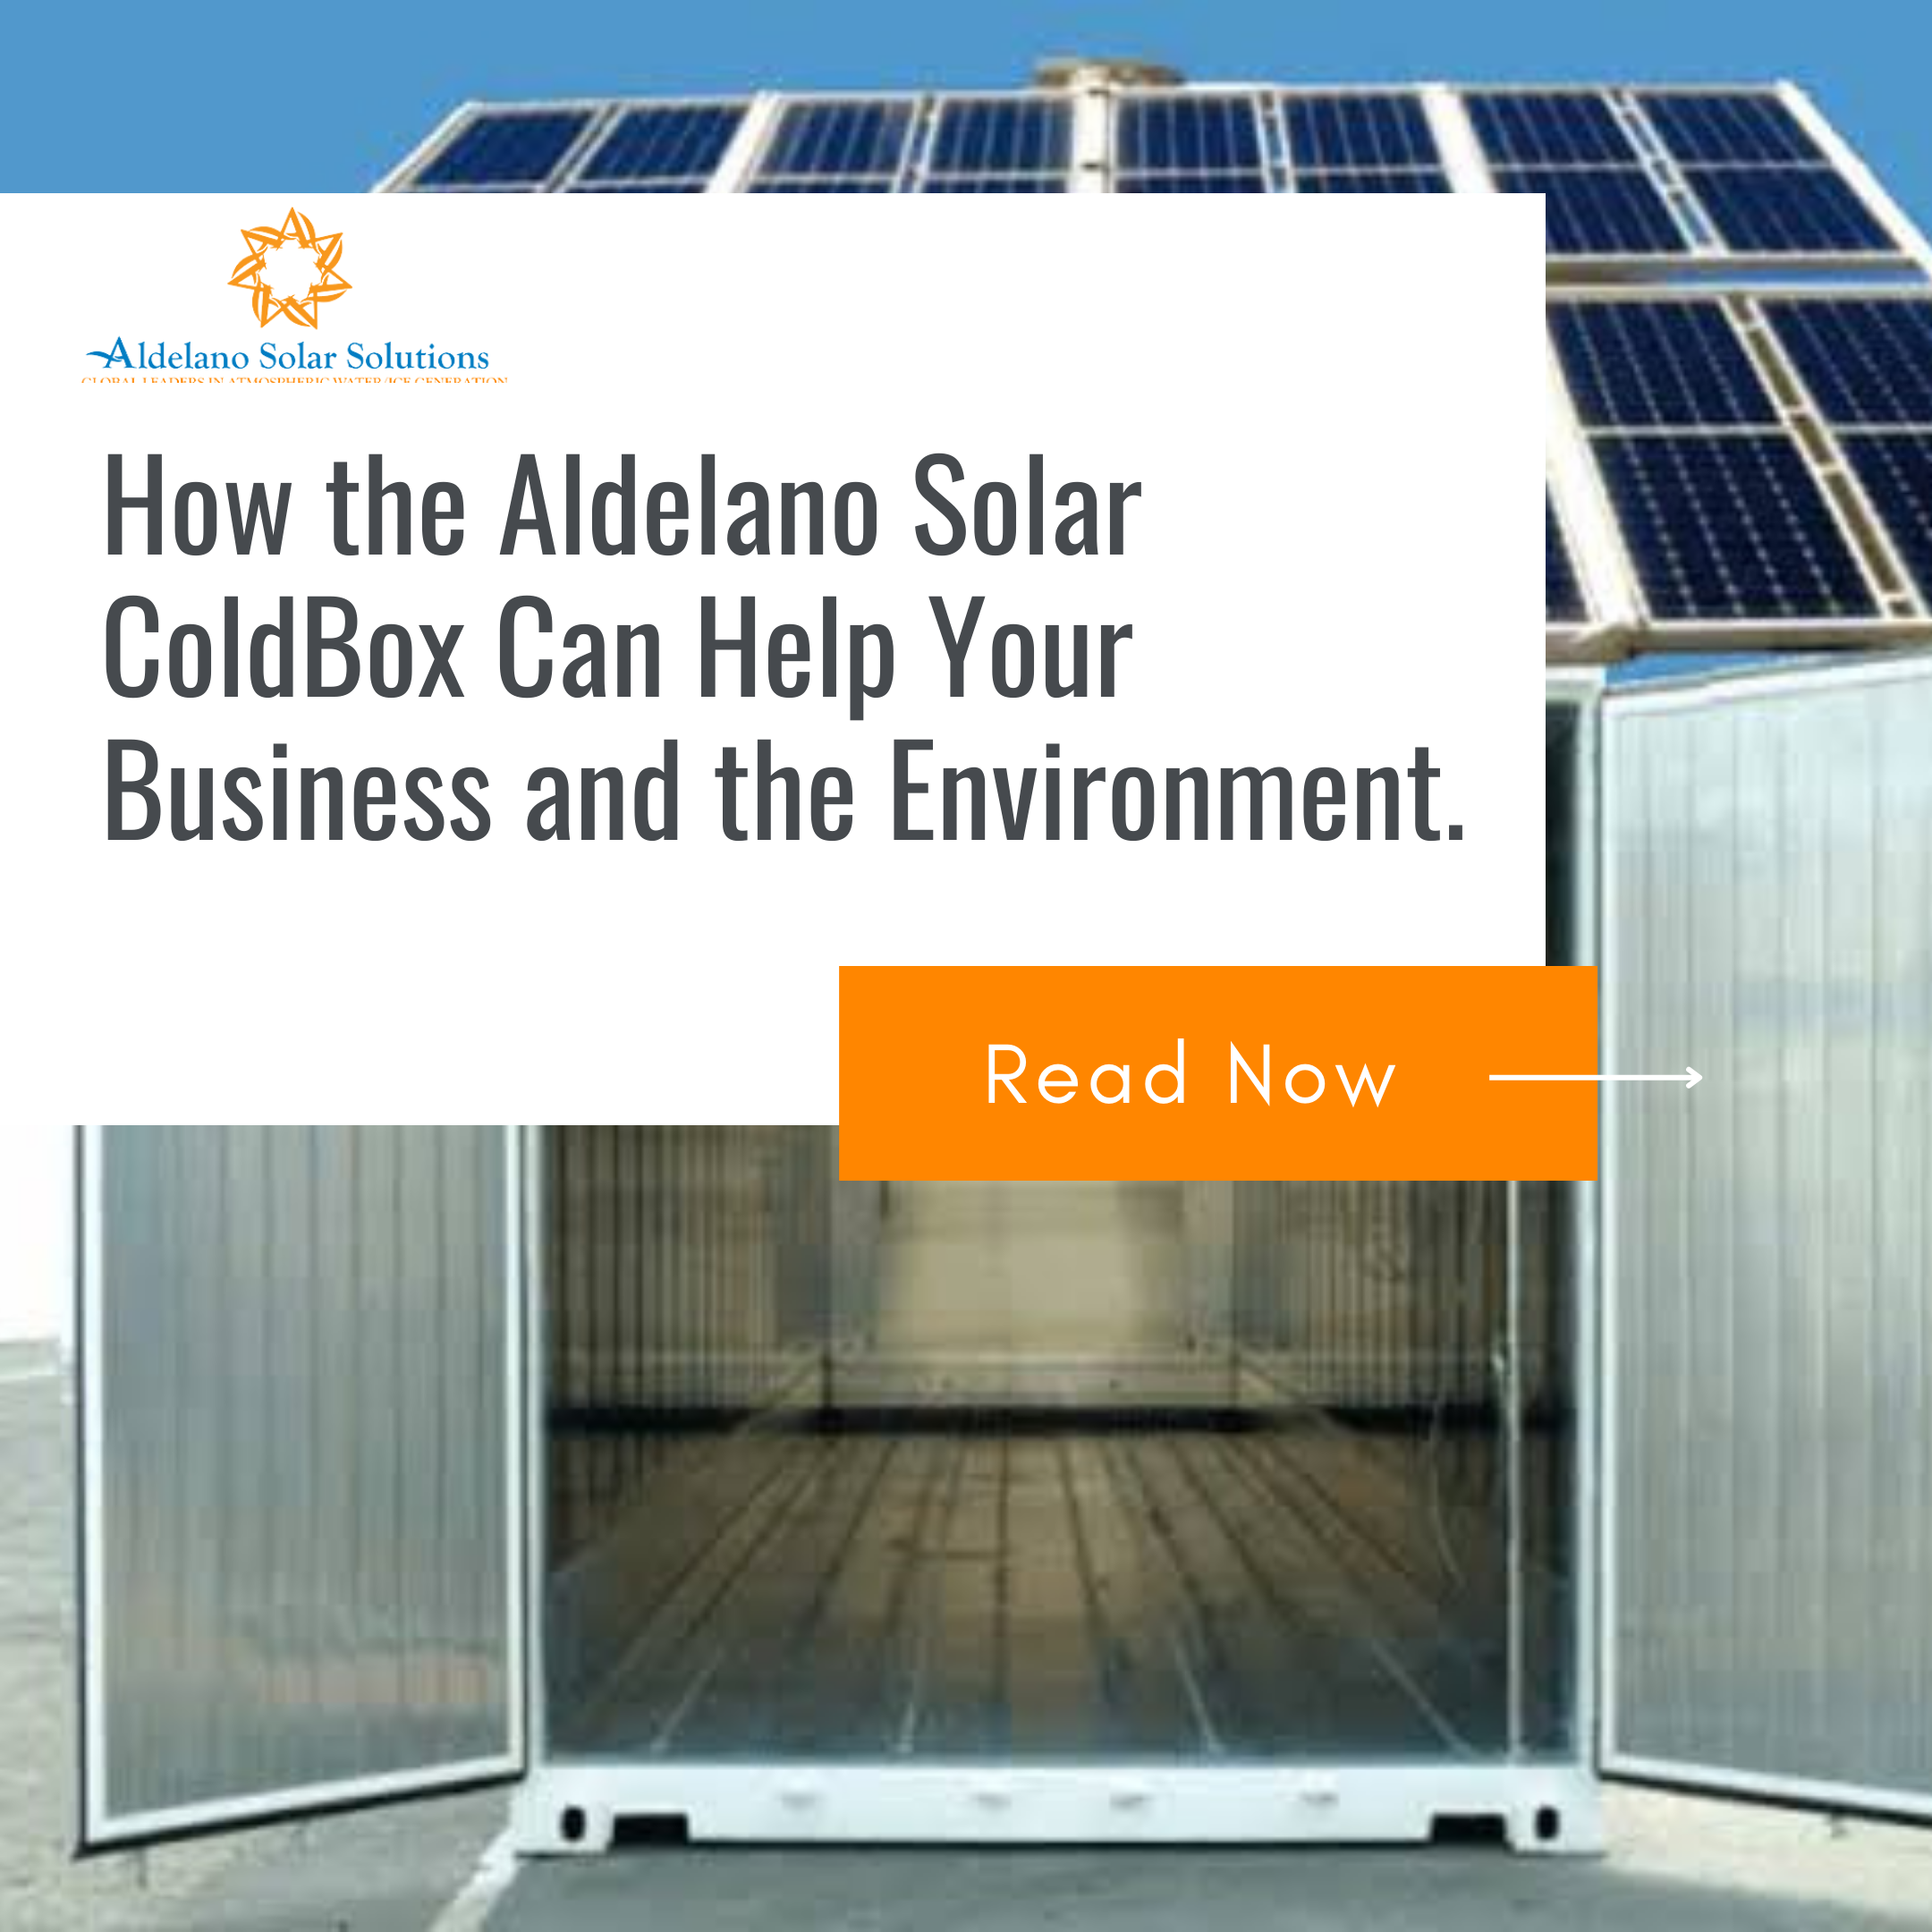 How Aldelano ColdBox can Help Your Business and the Environment